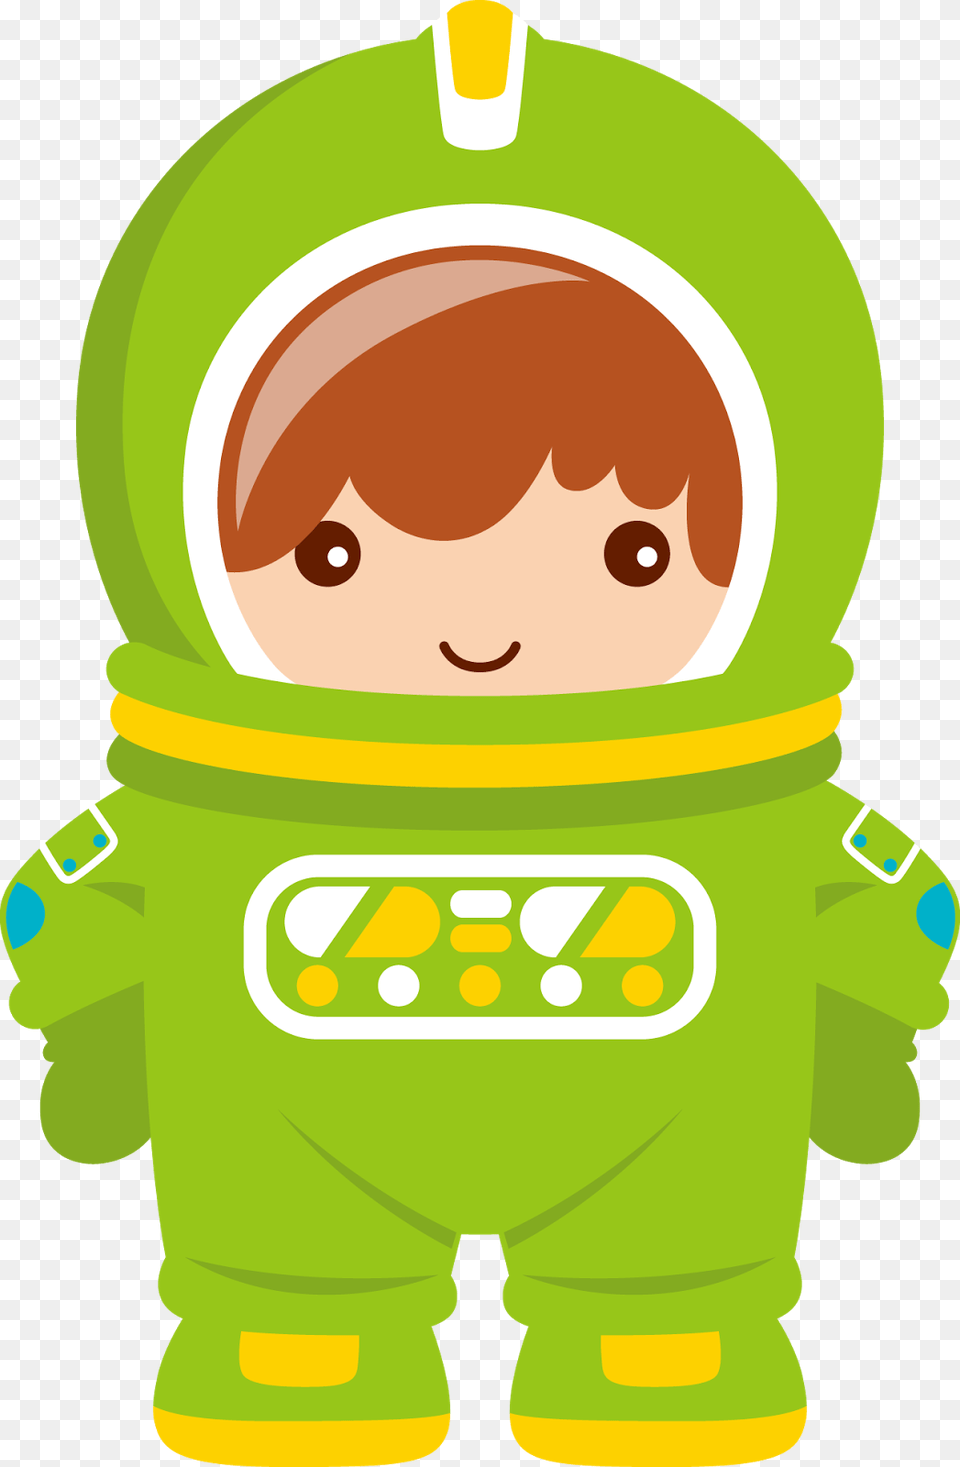 Clip Royalty Free Stock Aliens Astronauts And Spaceships Astronaut Clip Art, Clothing, Coat, Baby, Person Png Image